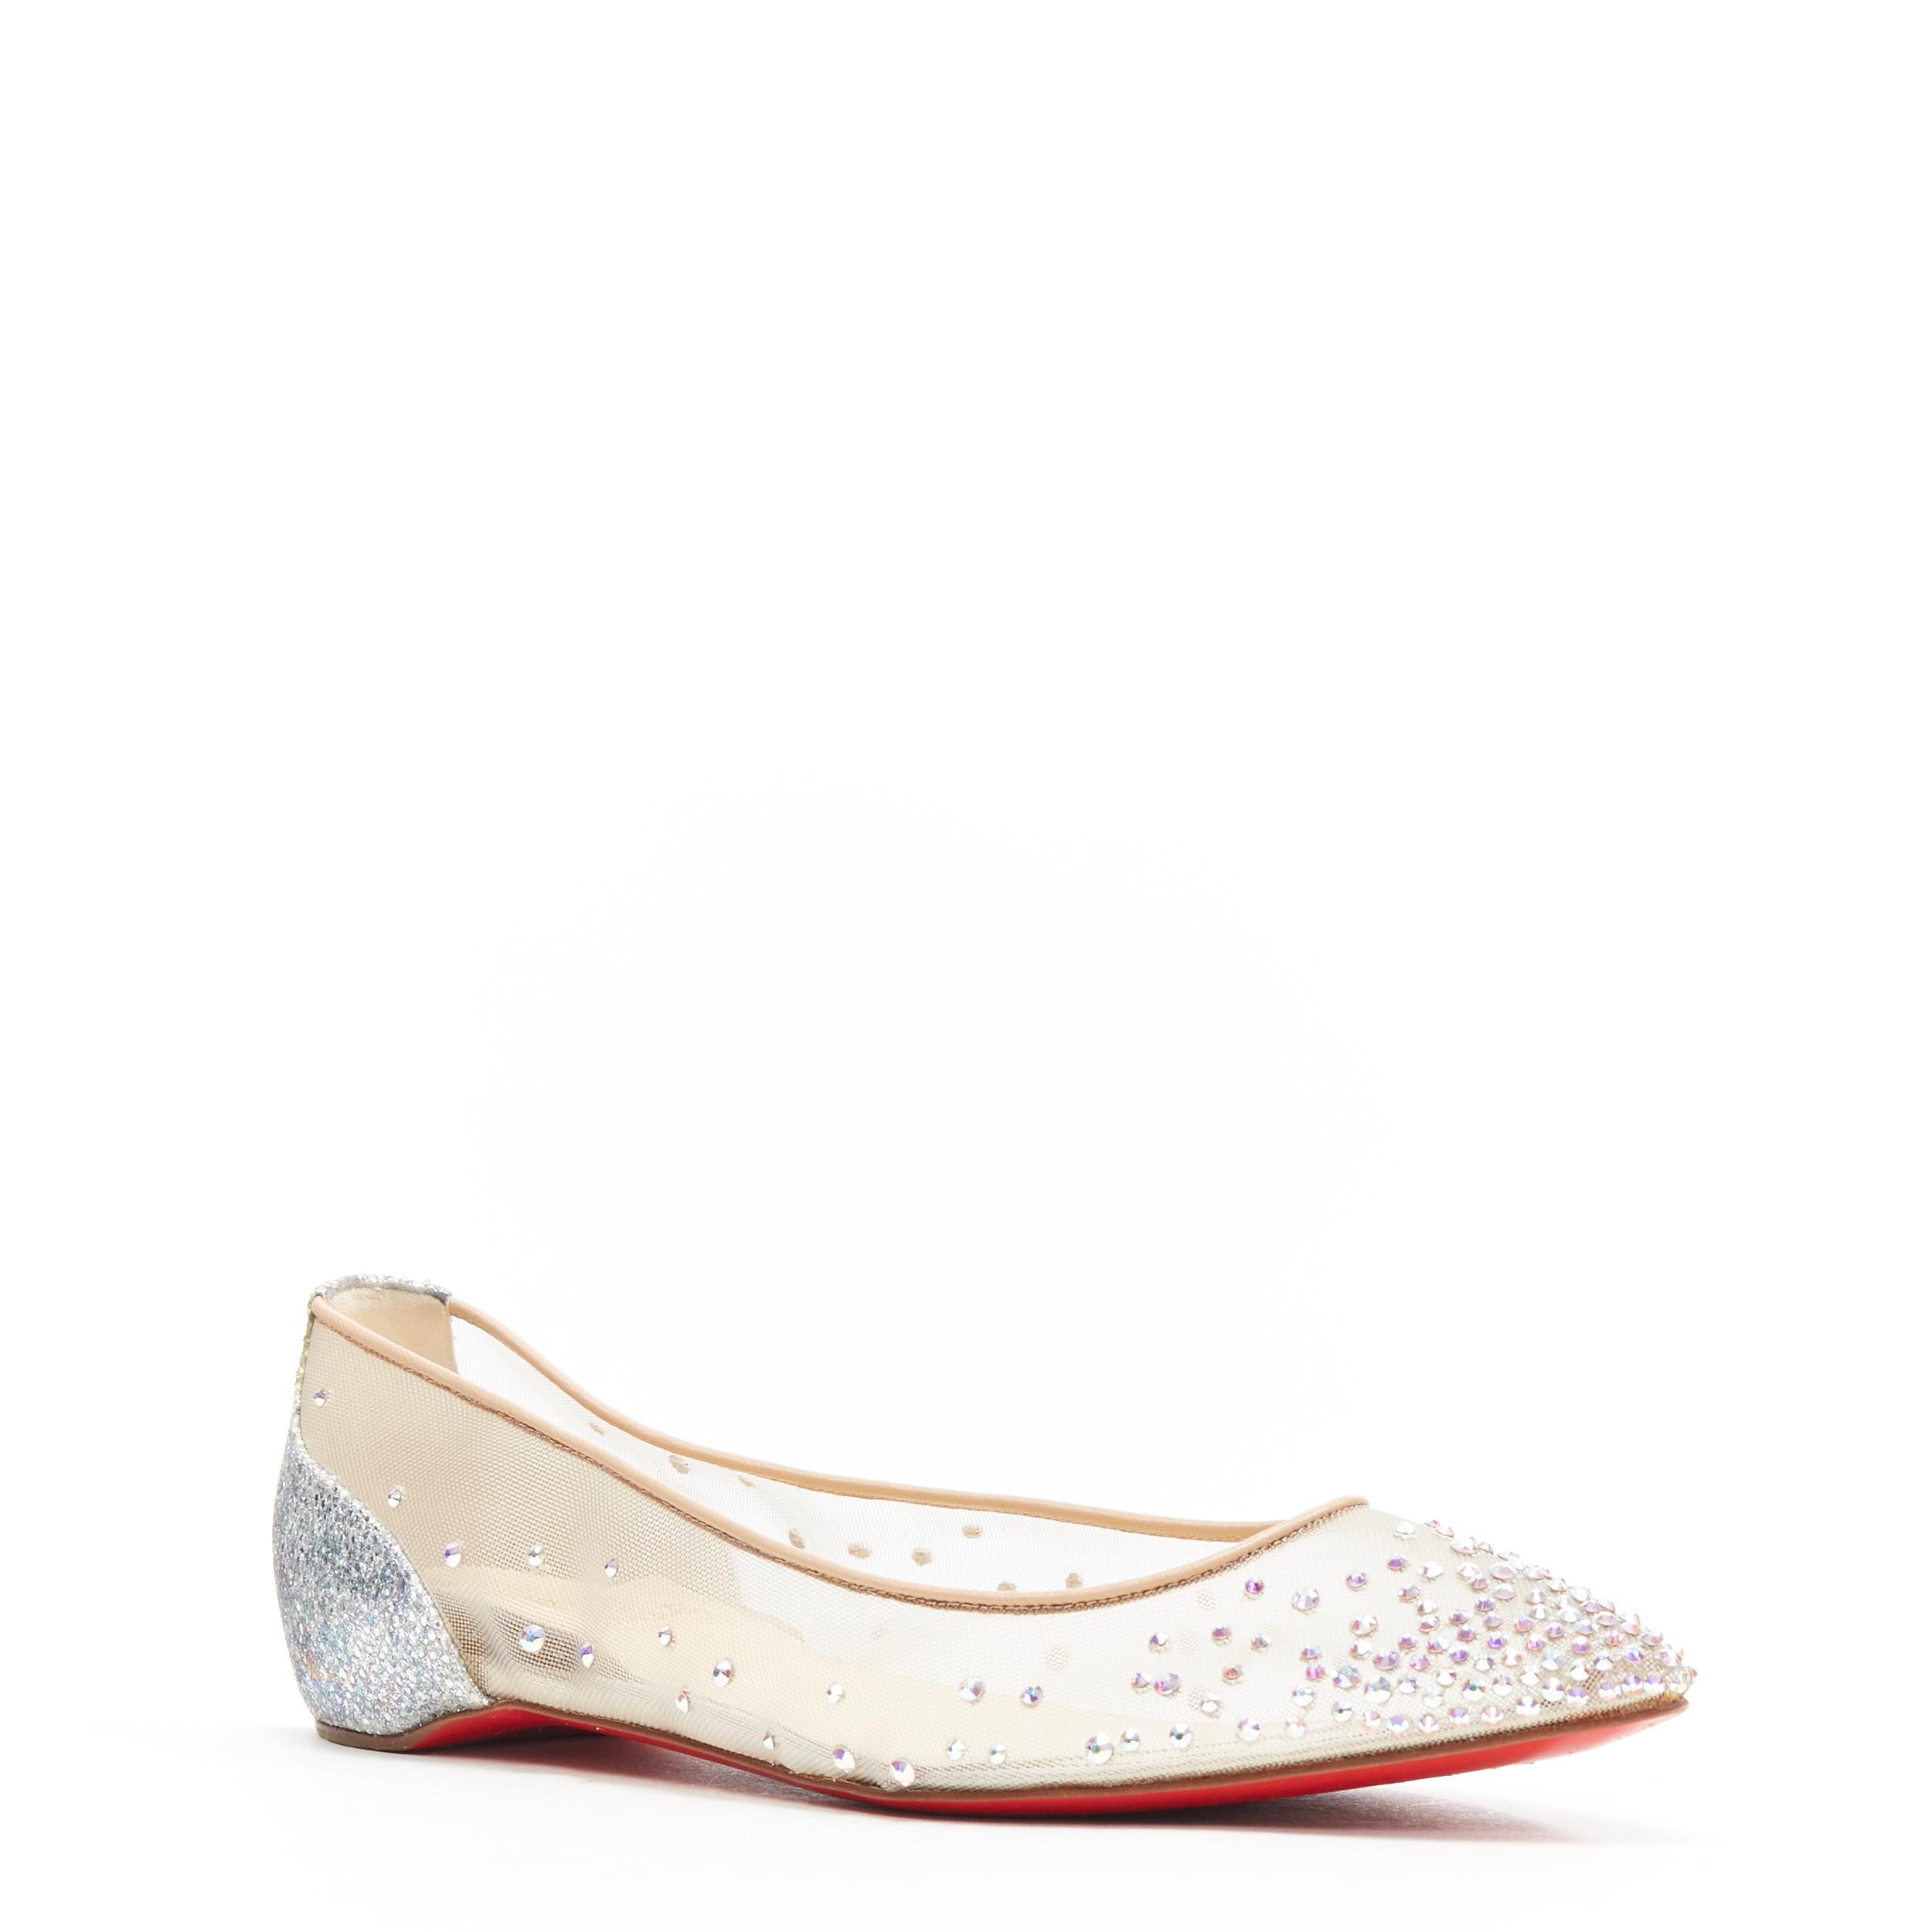 CHRISTIAN LOUBOUTIN Degrastrass Flats crystal strass nude mesh ballet flats EU37
Brand: Christian Louboutin
Designer: Christian Louboutin
Model Name / Style: Degrastrass Flats
Material: Leather
Color: Silver
Pattern: Solid
Closure: Slip on
Extra